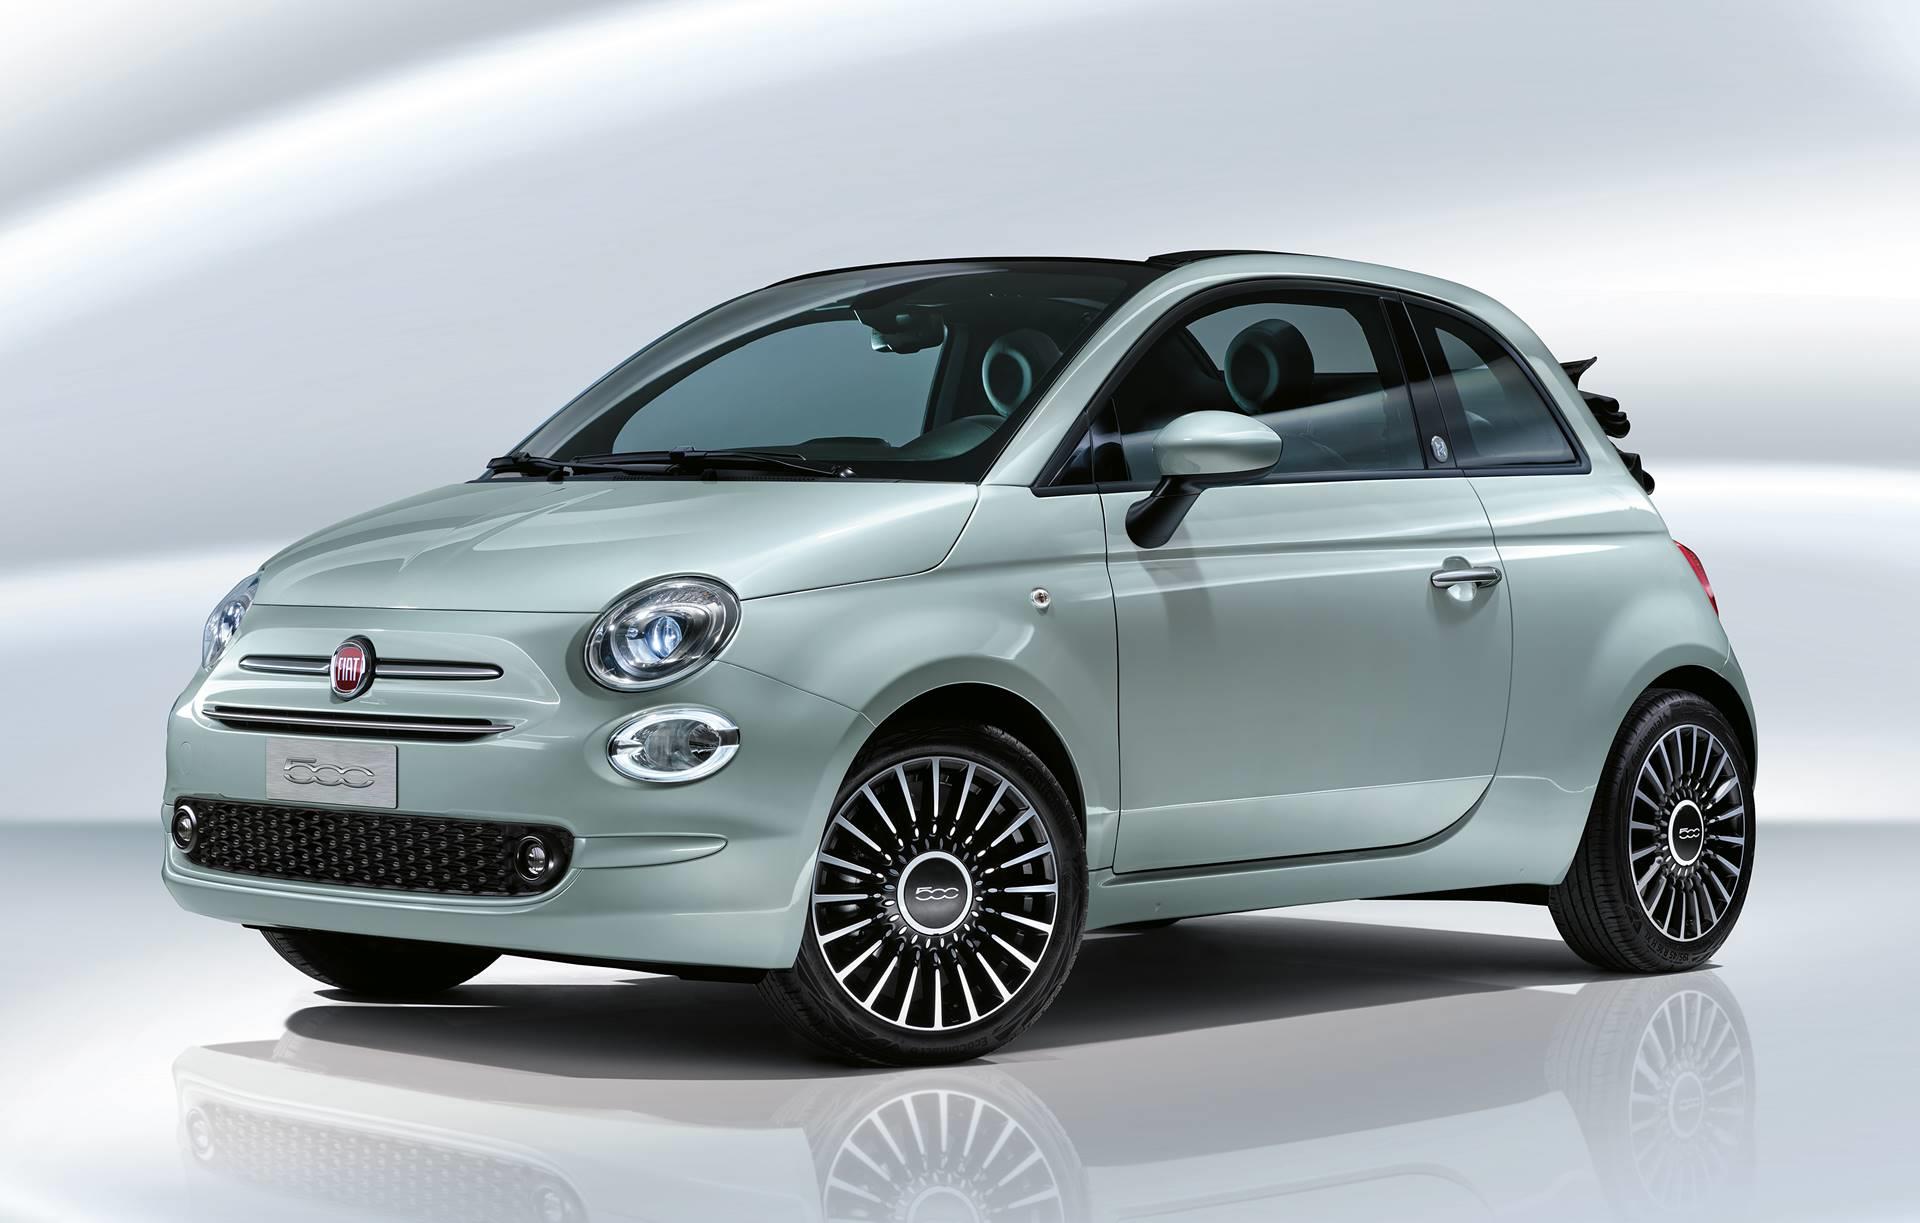 2020 Fiat 500 Hybrid Launch Edition technical and mechanical specifications